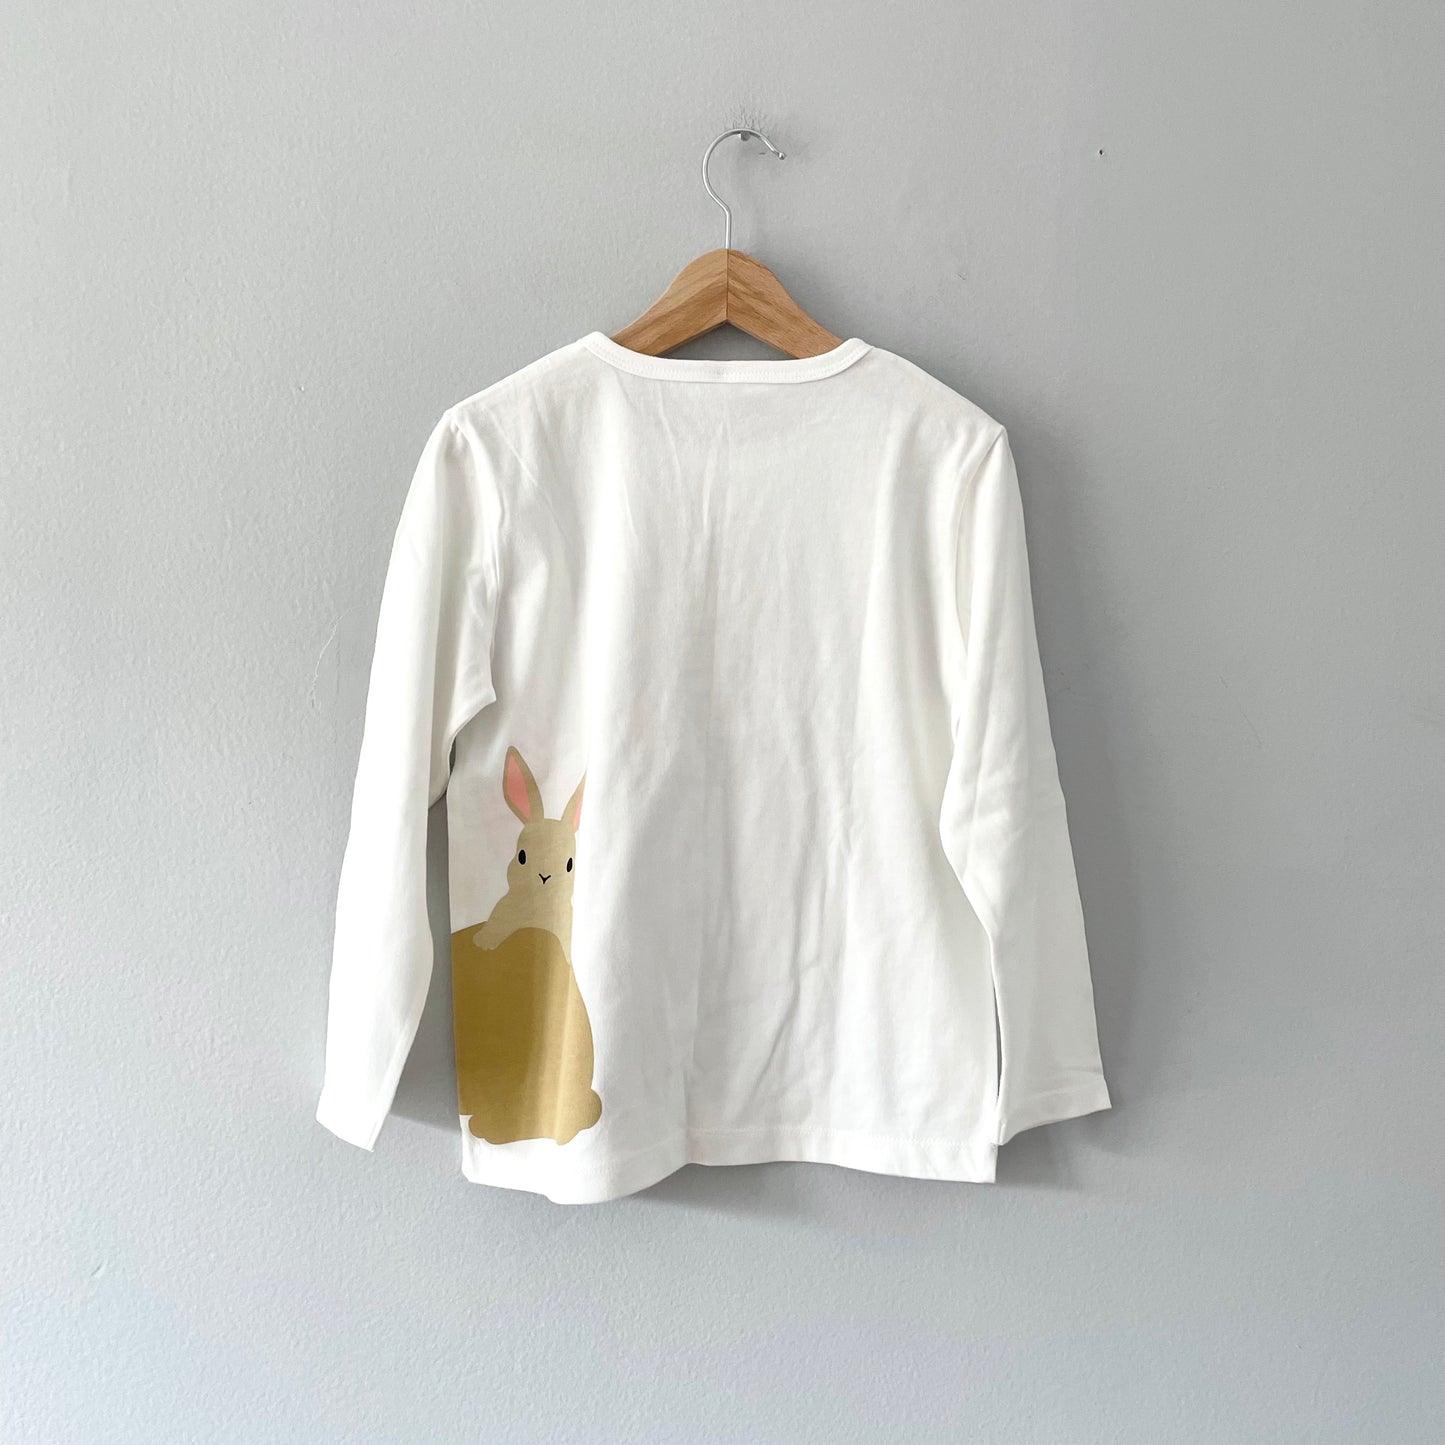 Muji / Long sleeve t-shirt / 6Y - New with tag